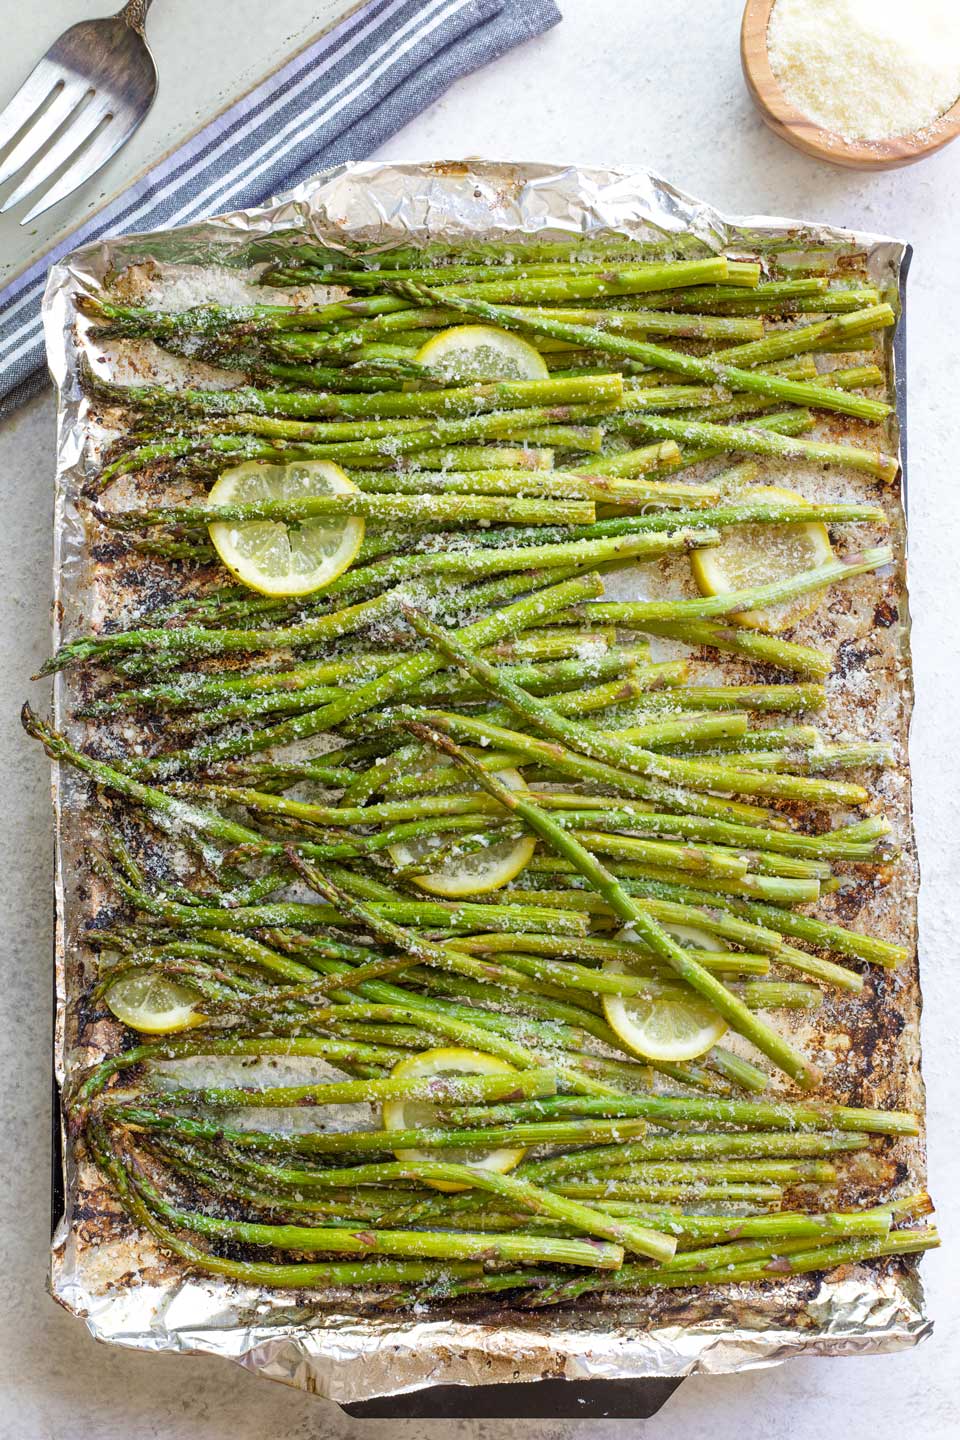 Asparagus still on grill pan, sprinkled with parmesan cheese and with lemon slices tucked in.